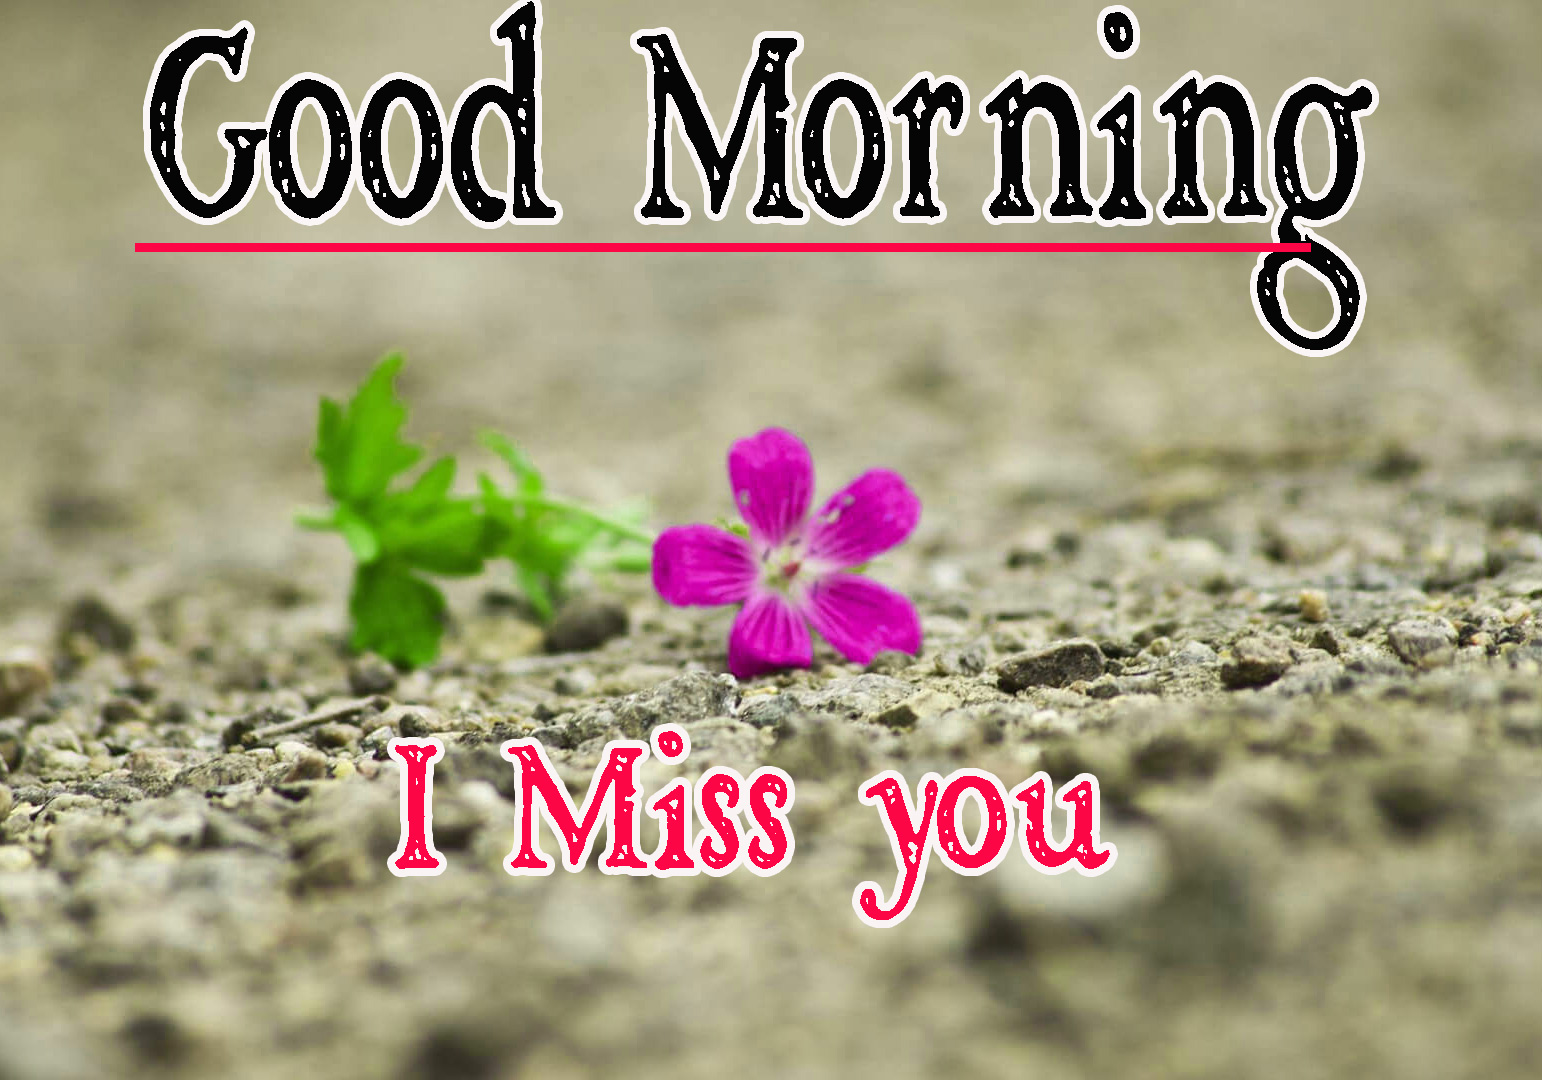 Free Full HD Special Friend Good Morning Wallpaper Download 